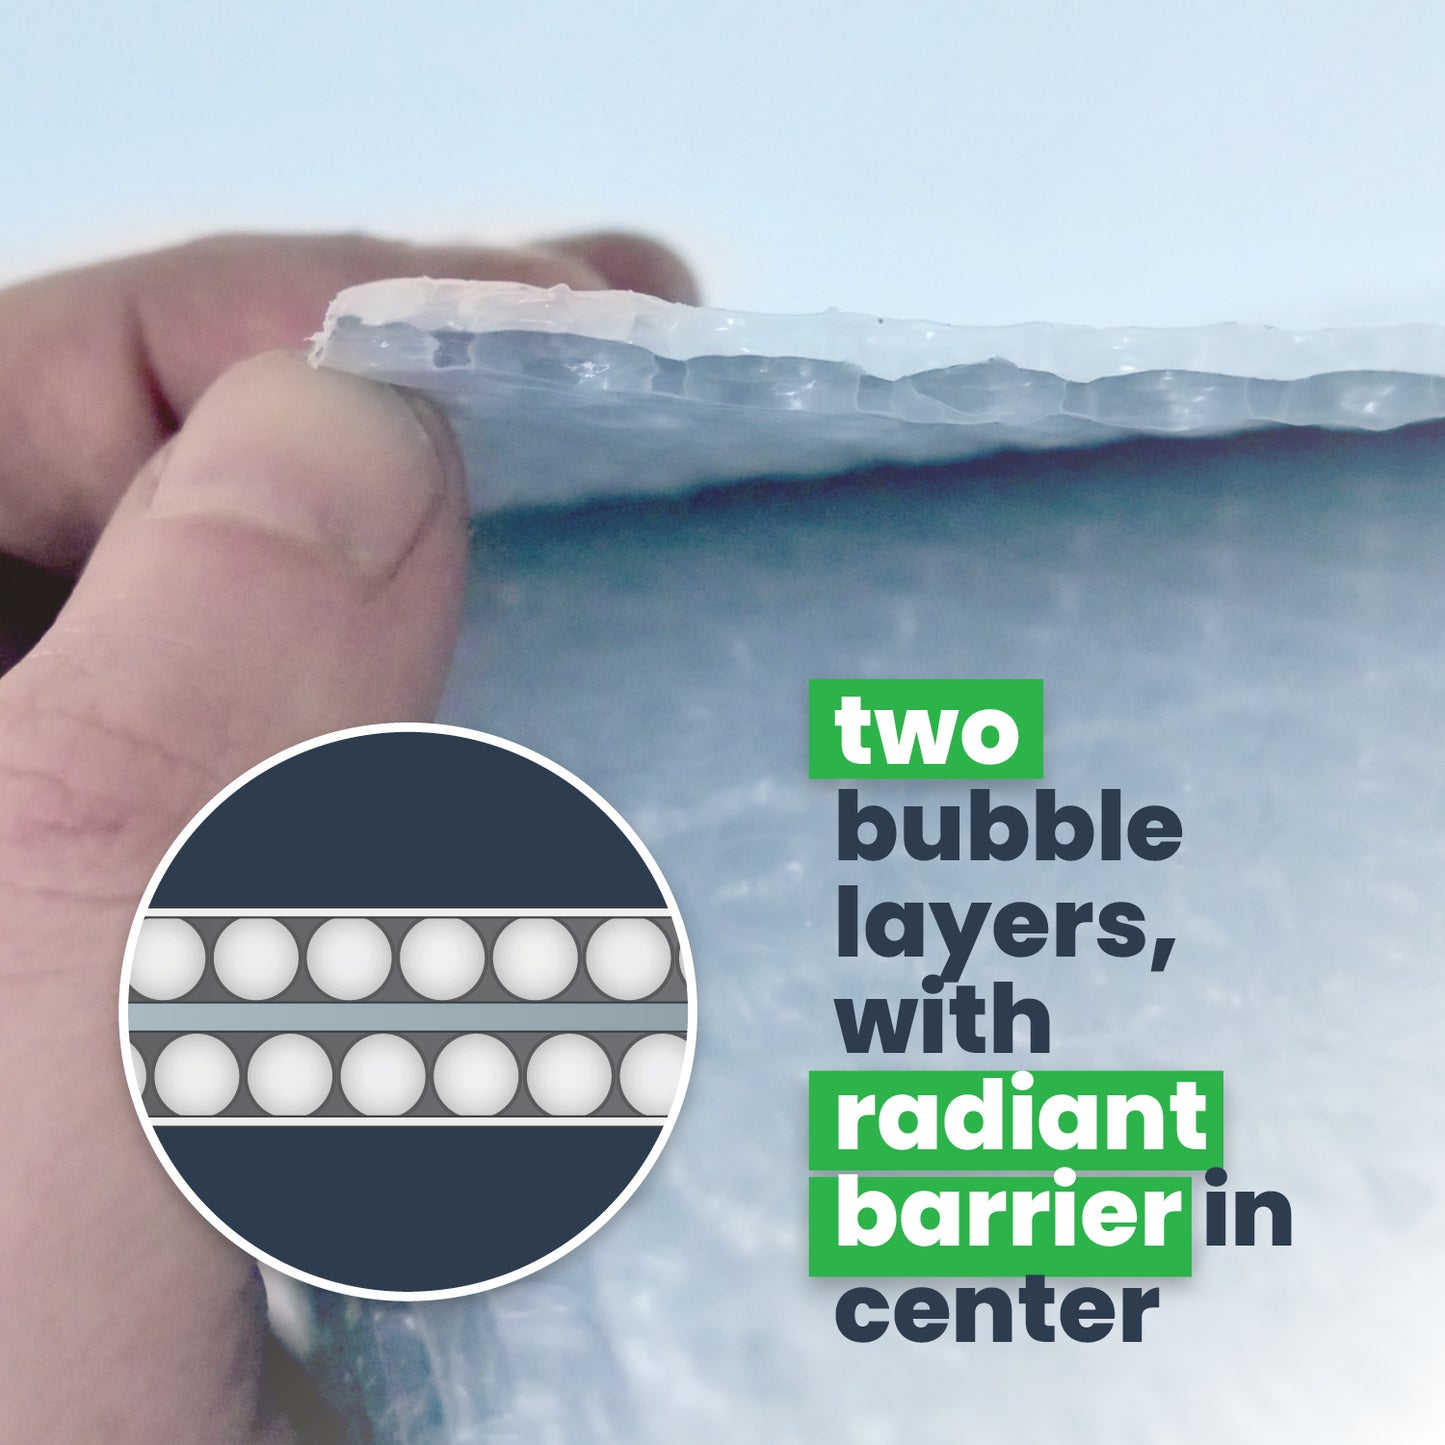 Two bubble layers with radiant barrier in the center